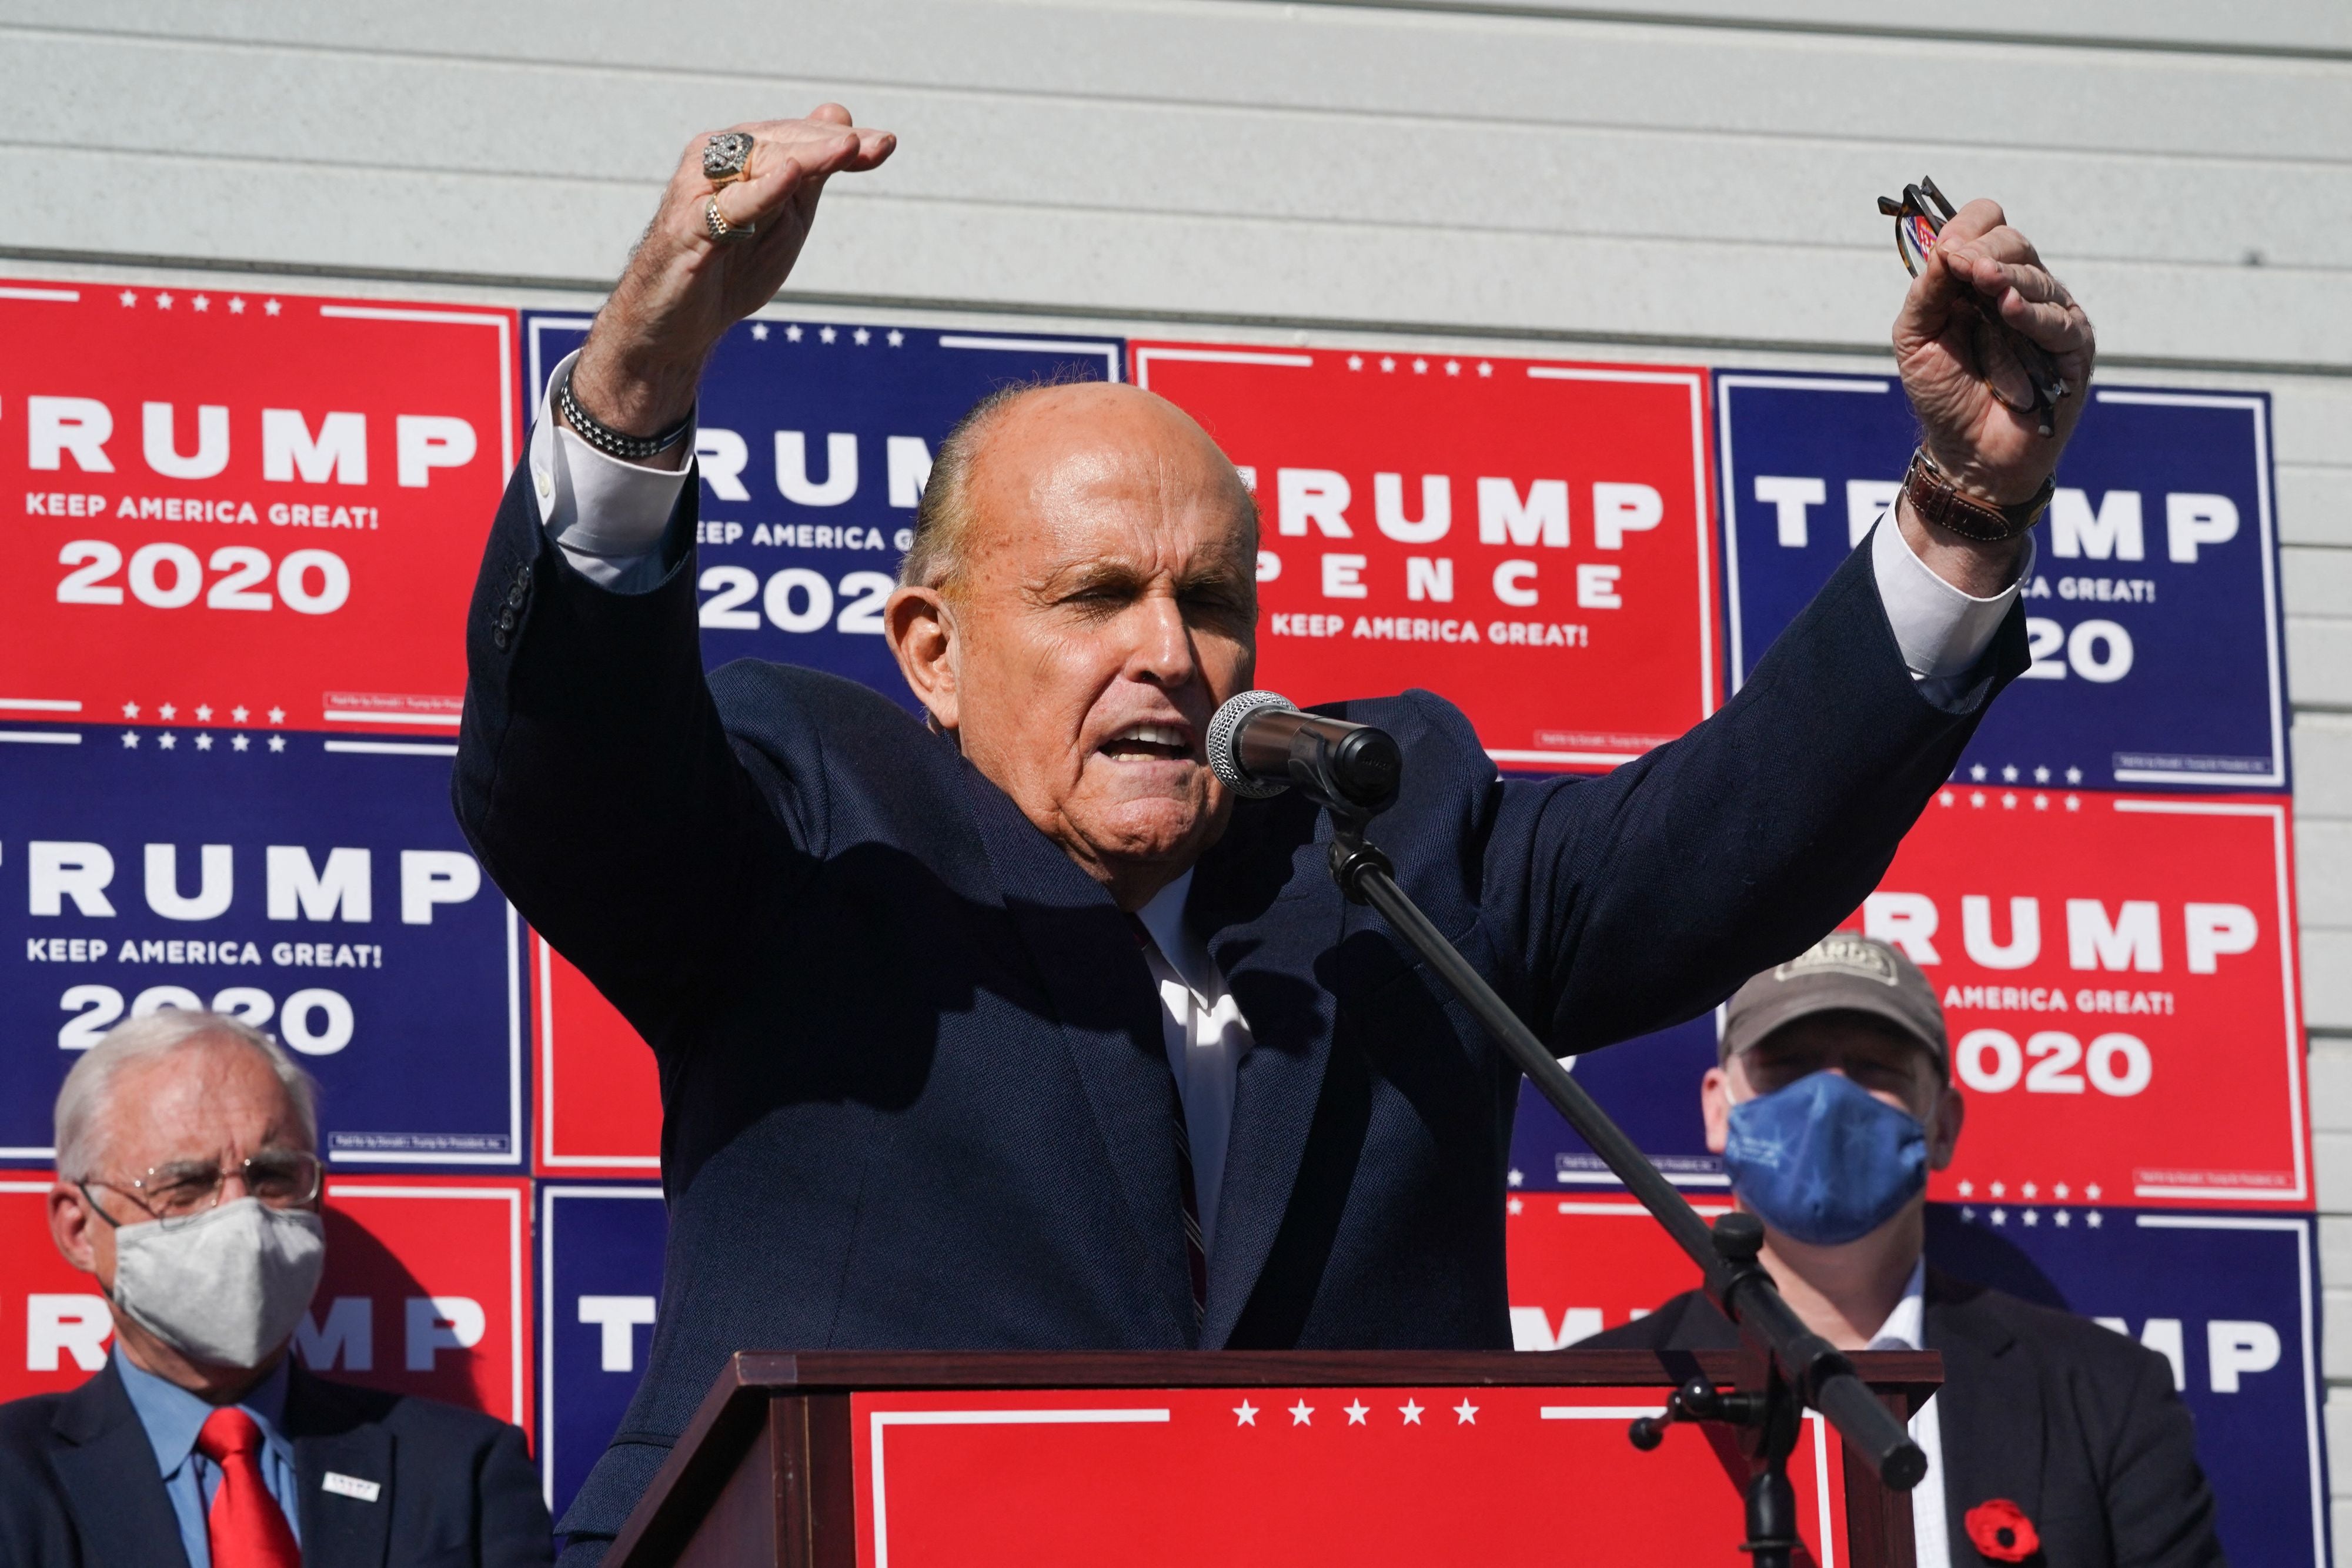 File - Rudy Giuliani, speaks at a news conference in the parking lot of a landscaping company on November 7, 2020 in Philadelphia